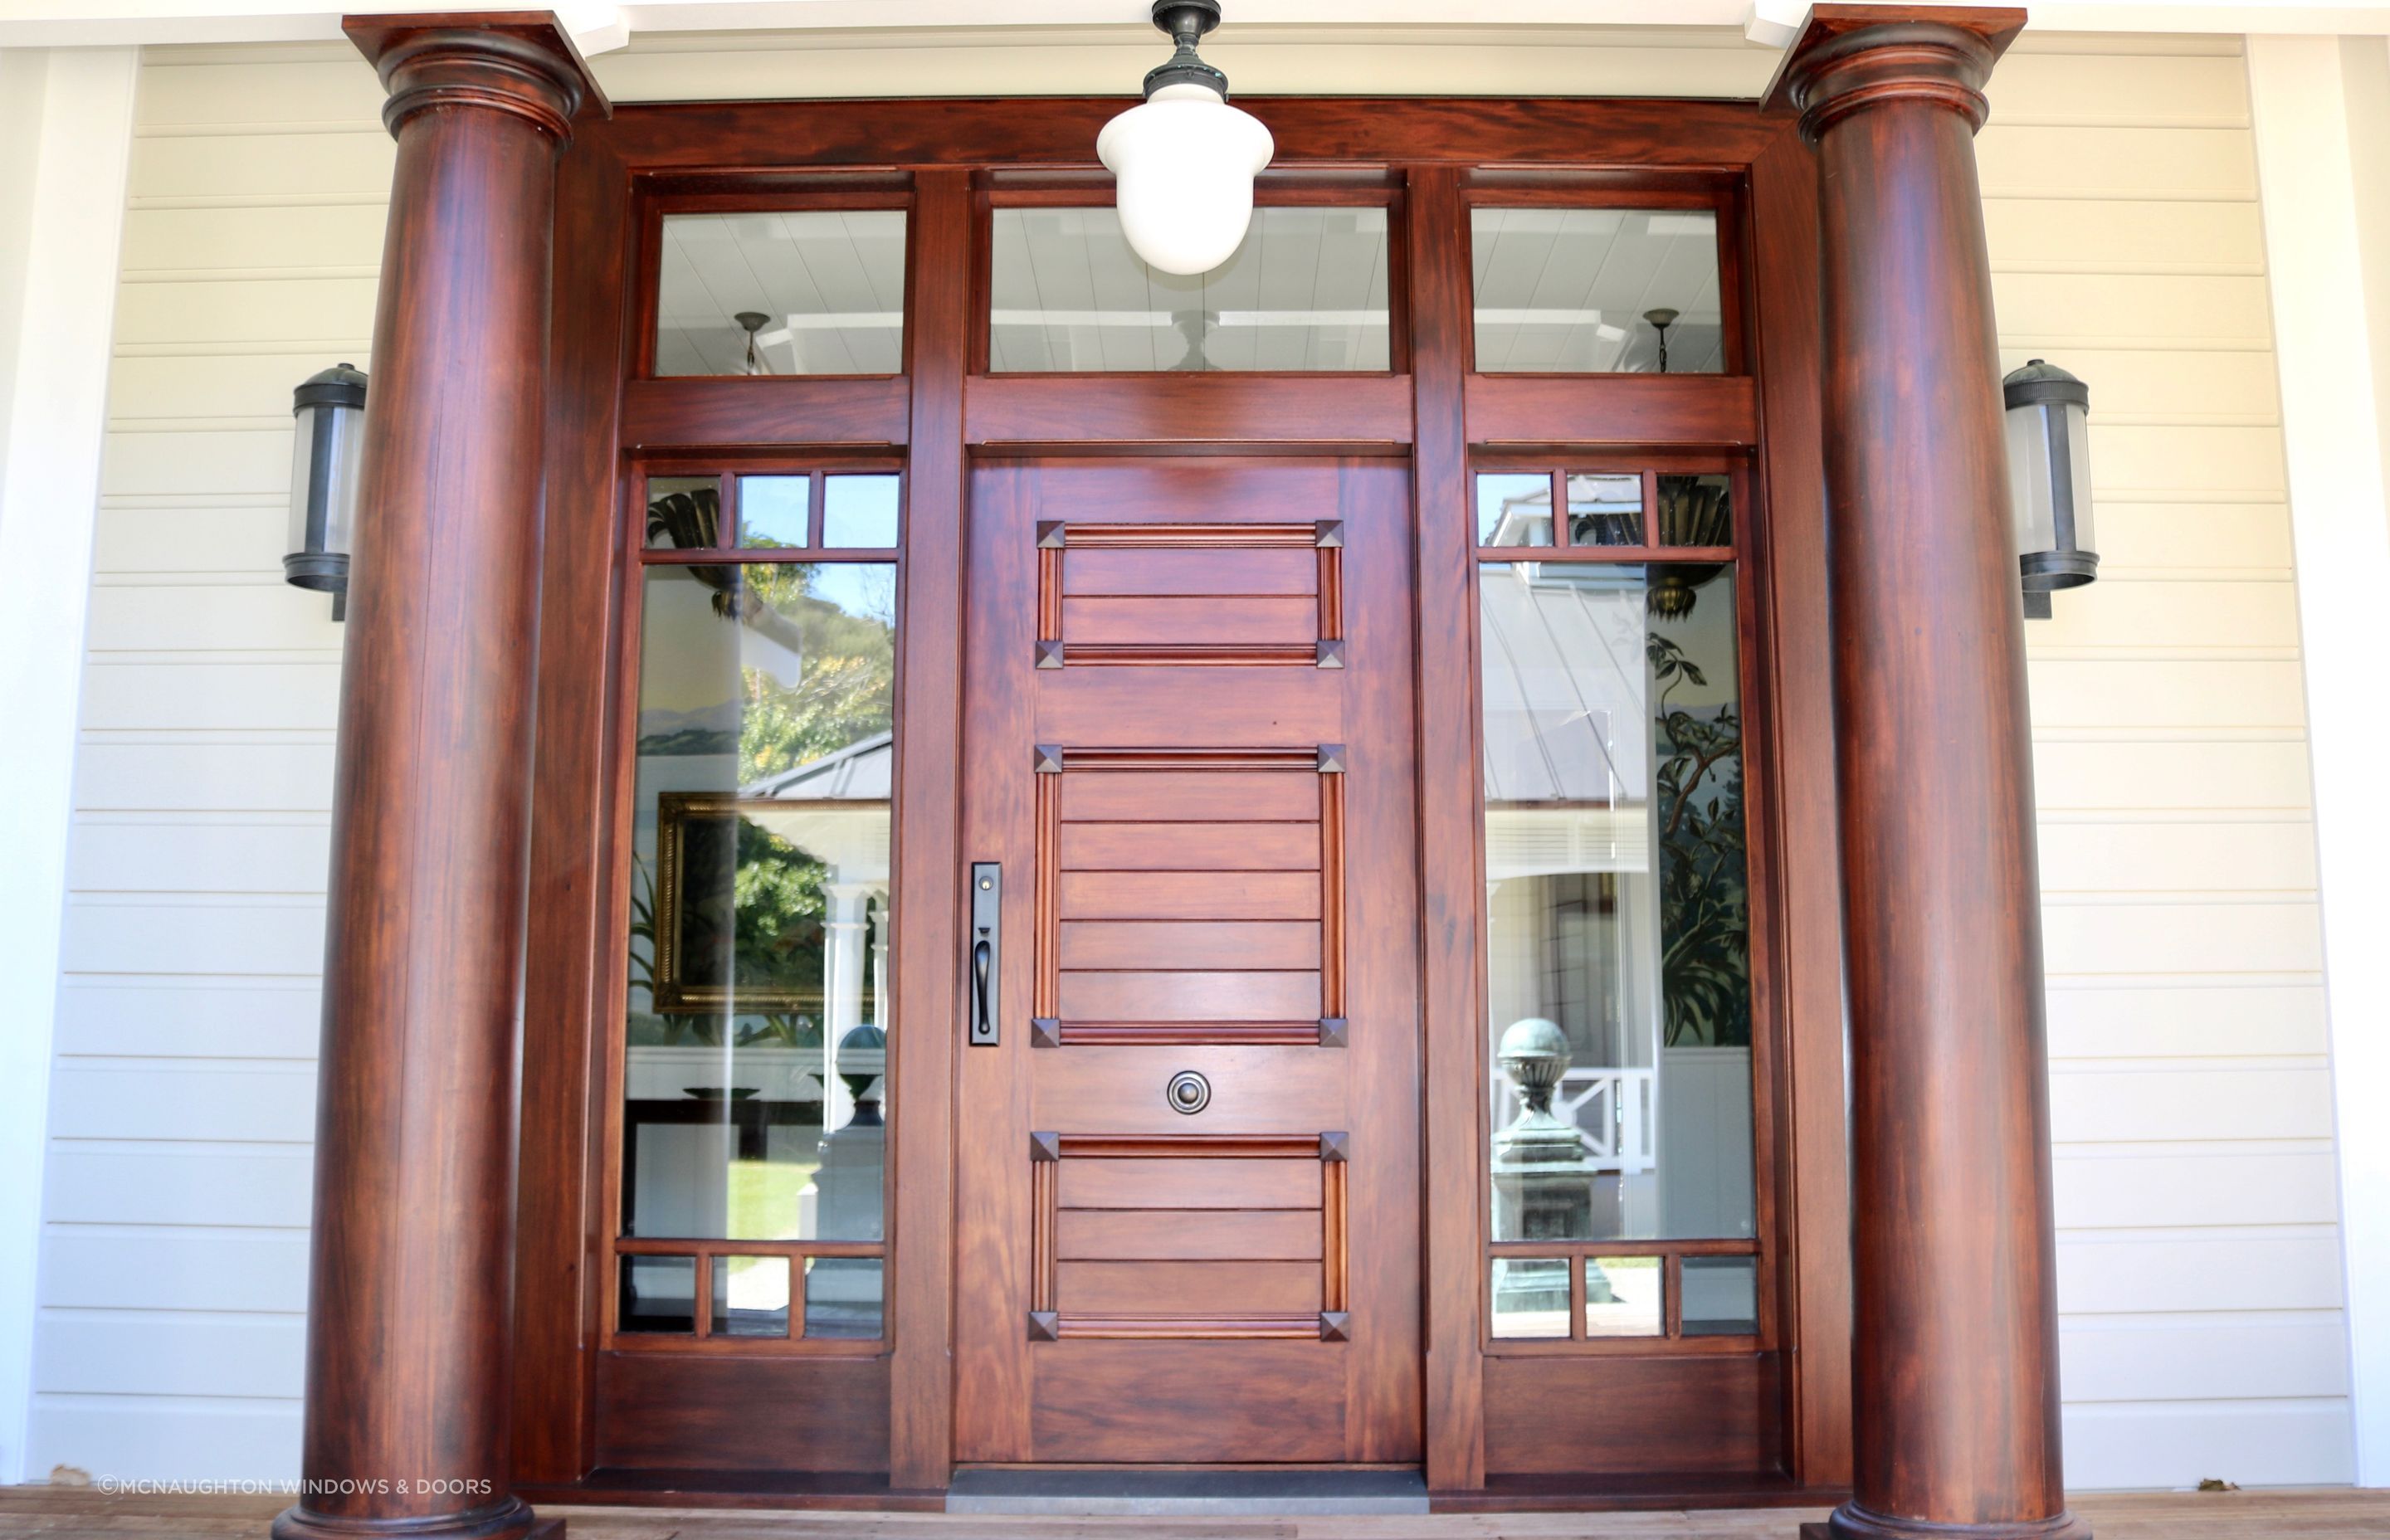 Front entrance doors can be a great way to make a bold statement